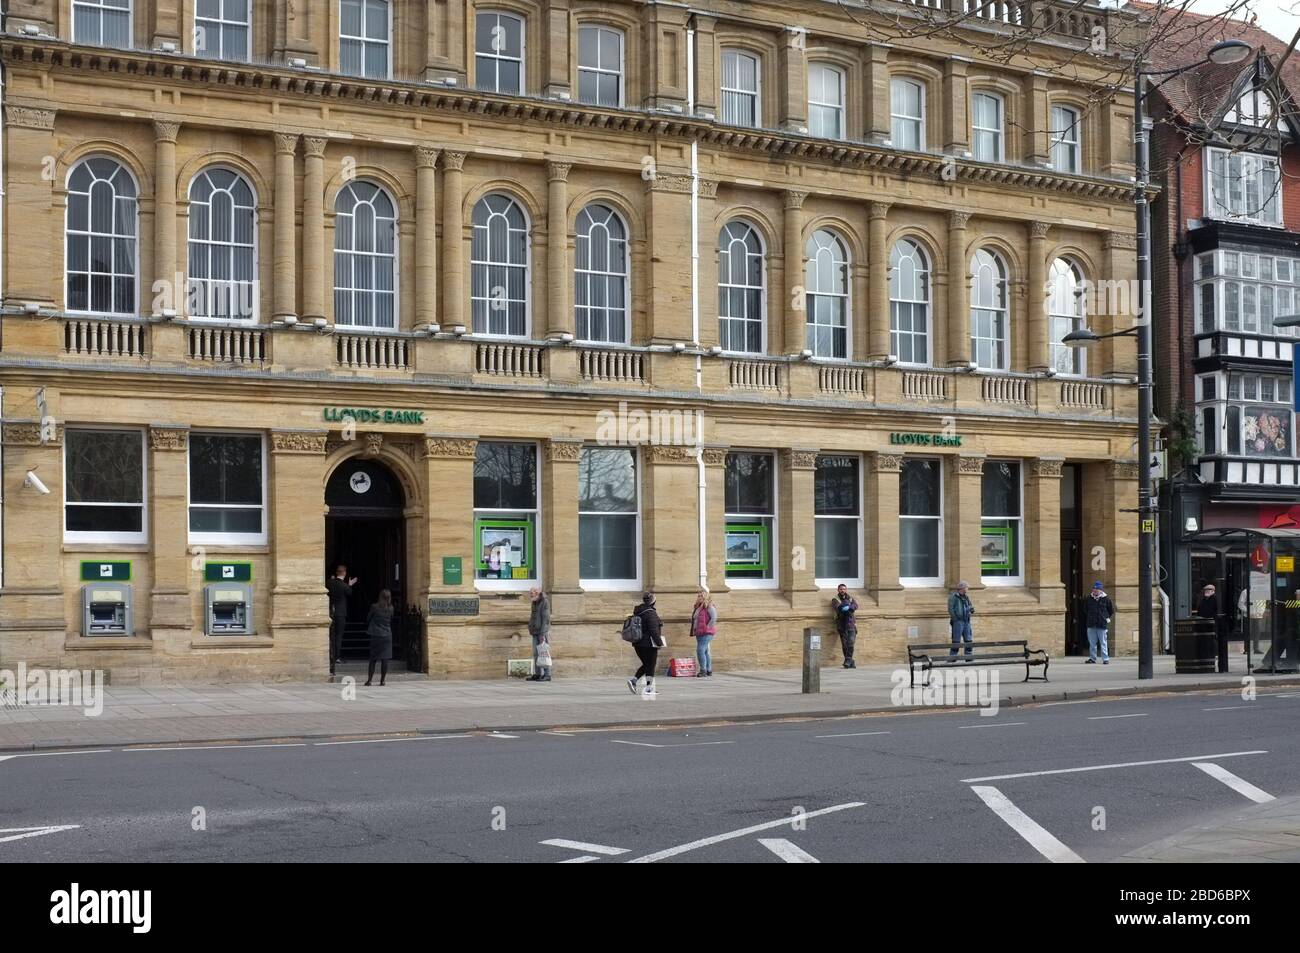 Social distancing, due to the Covid 19 outbreak, outside Salisbury's Lloyds bank. Wiltshire UK. April 2020. Stock Photo